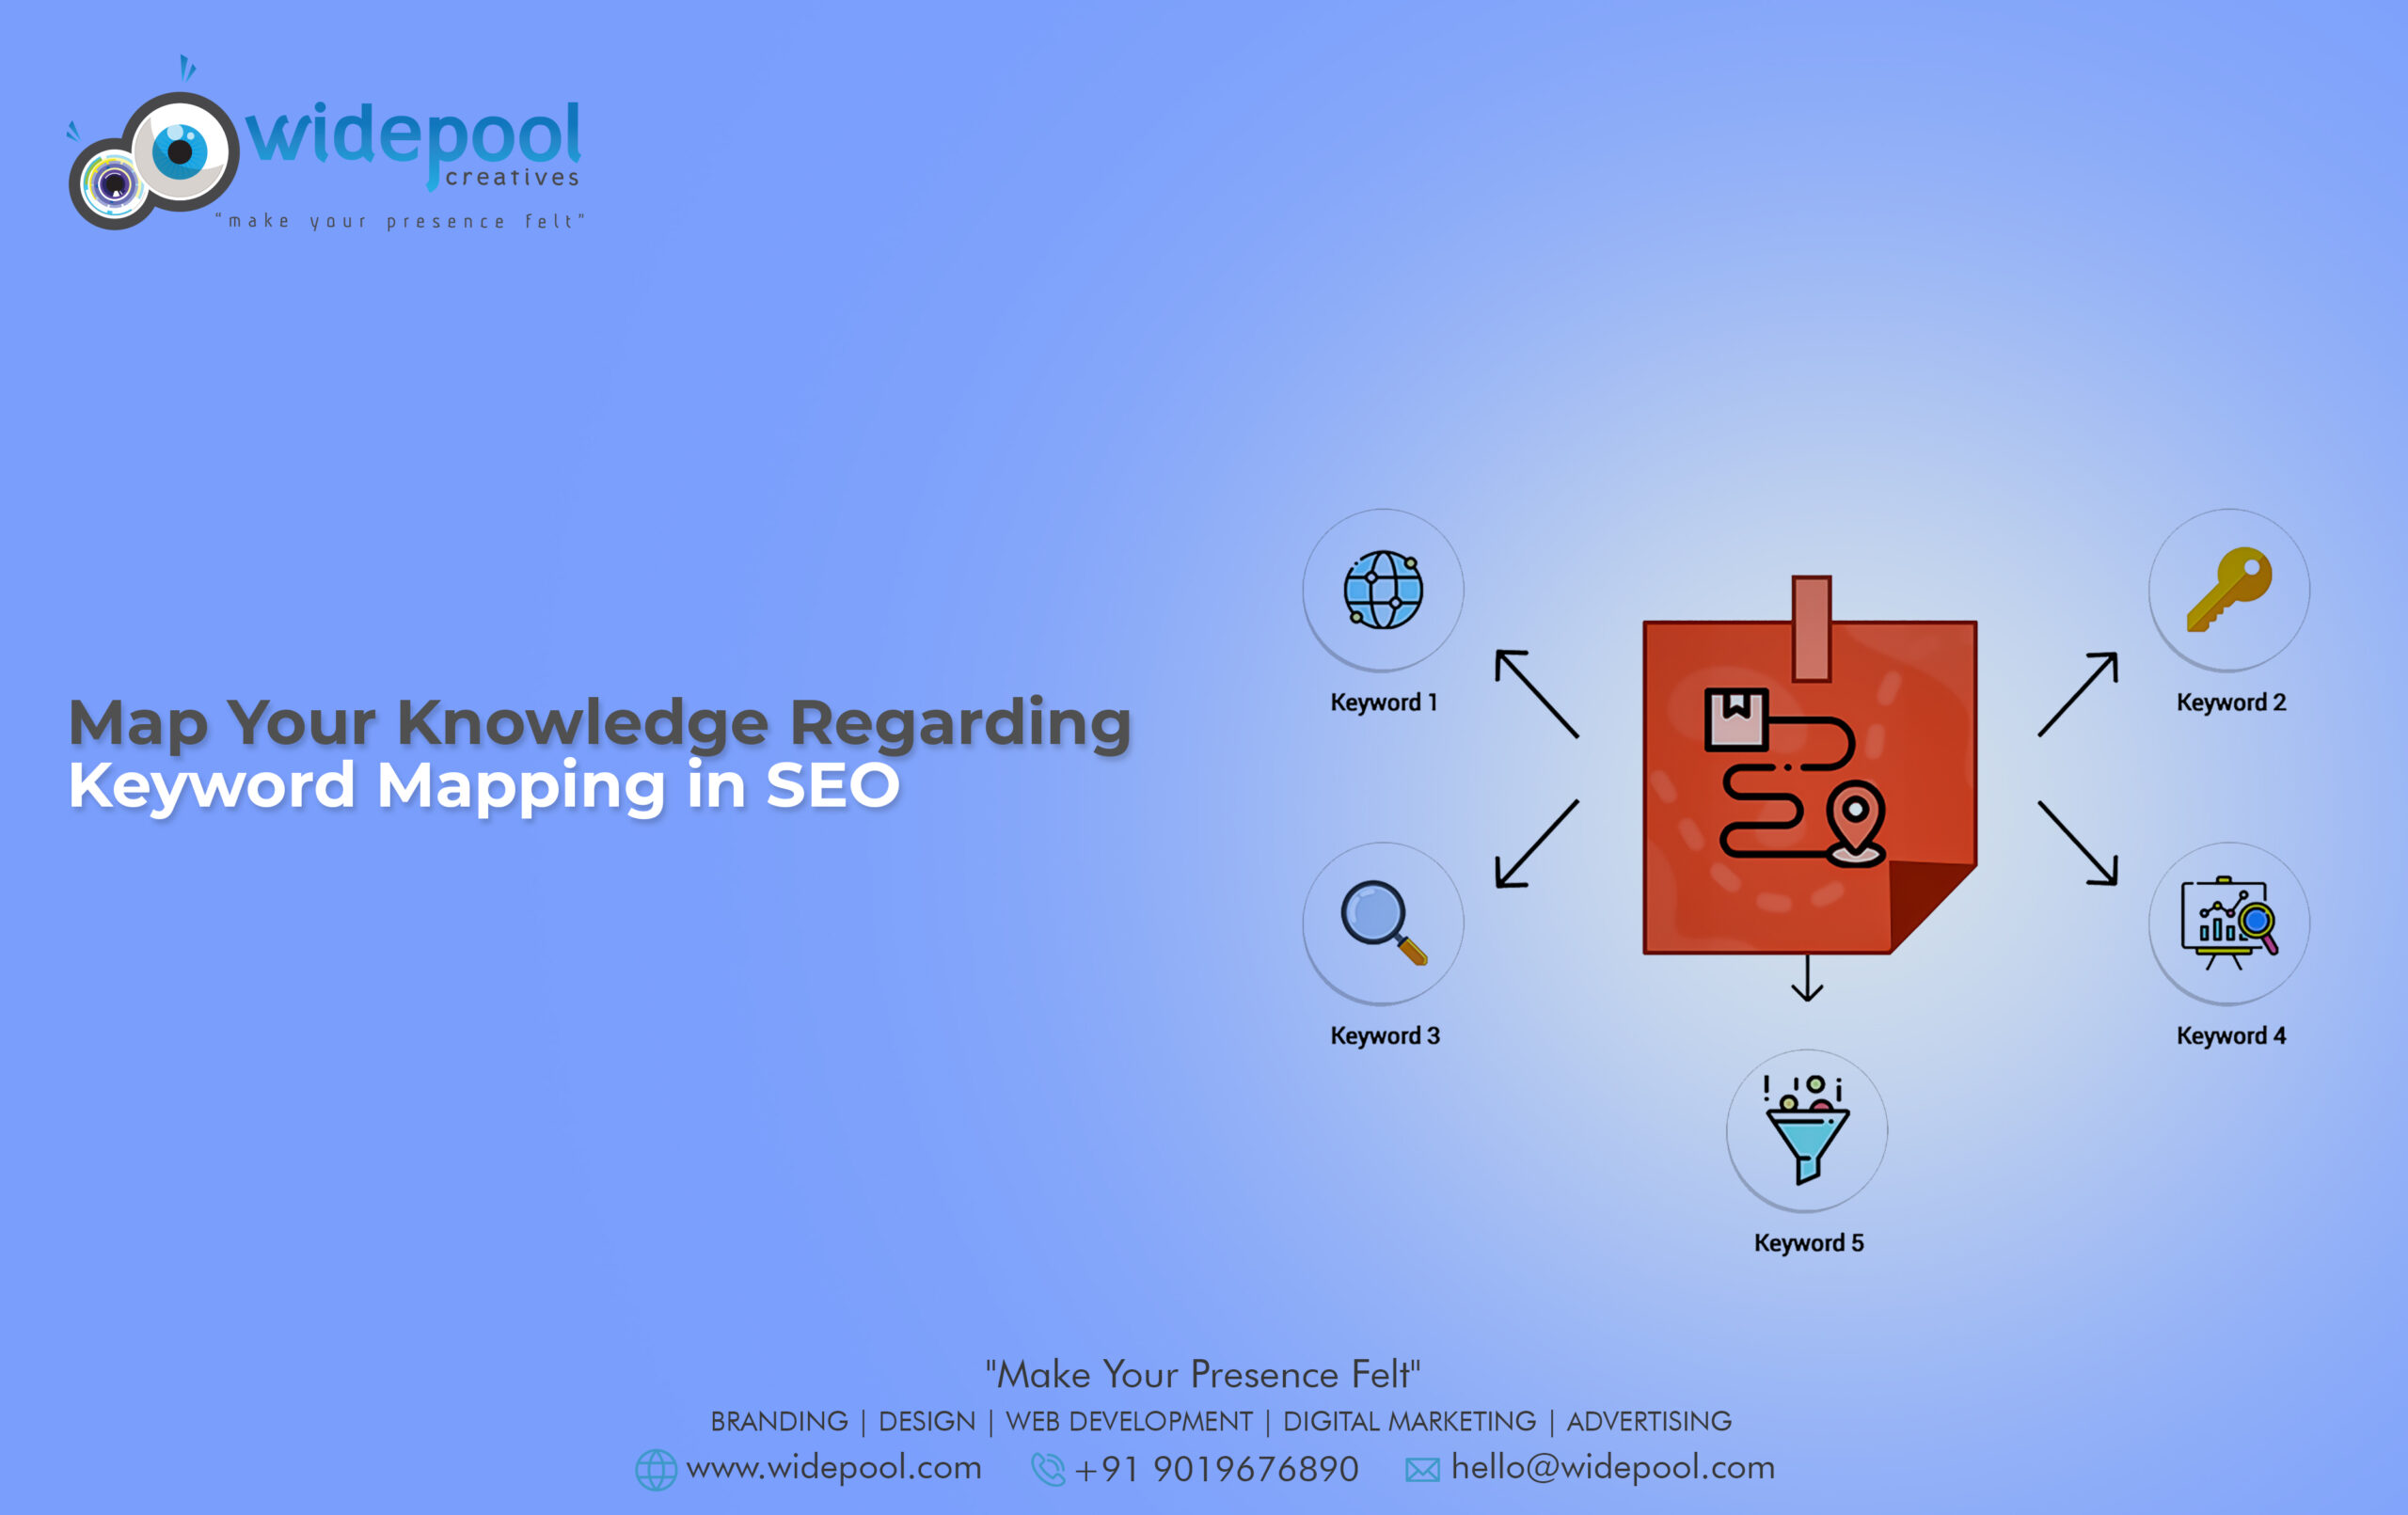 Map Your Knowledge Regarding Keyword Mapping in SEO